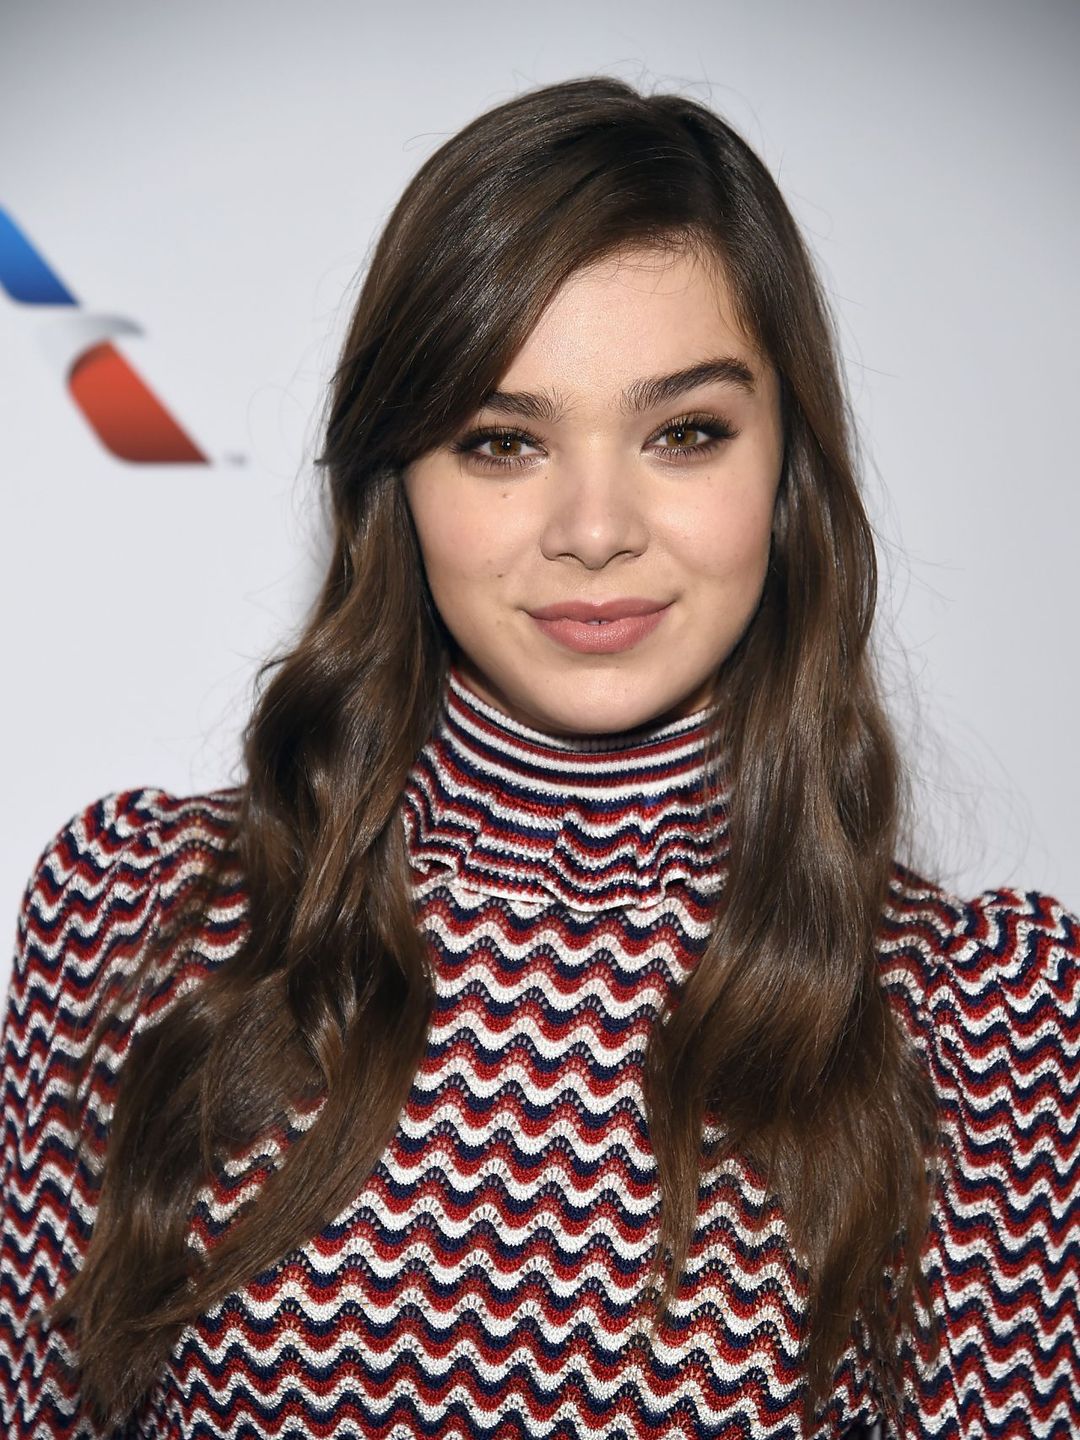 Hailee Steinfeld who is her father